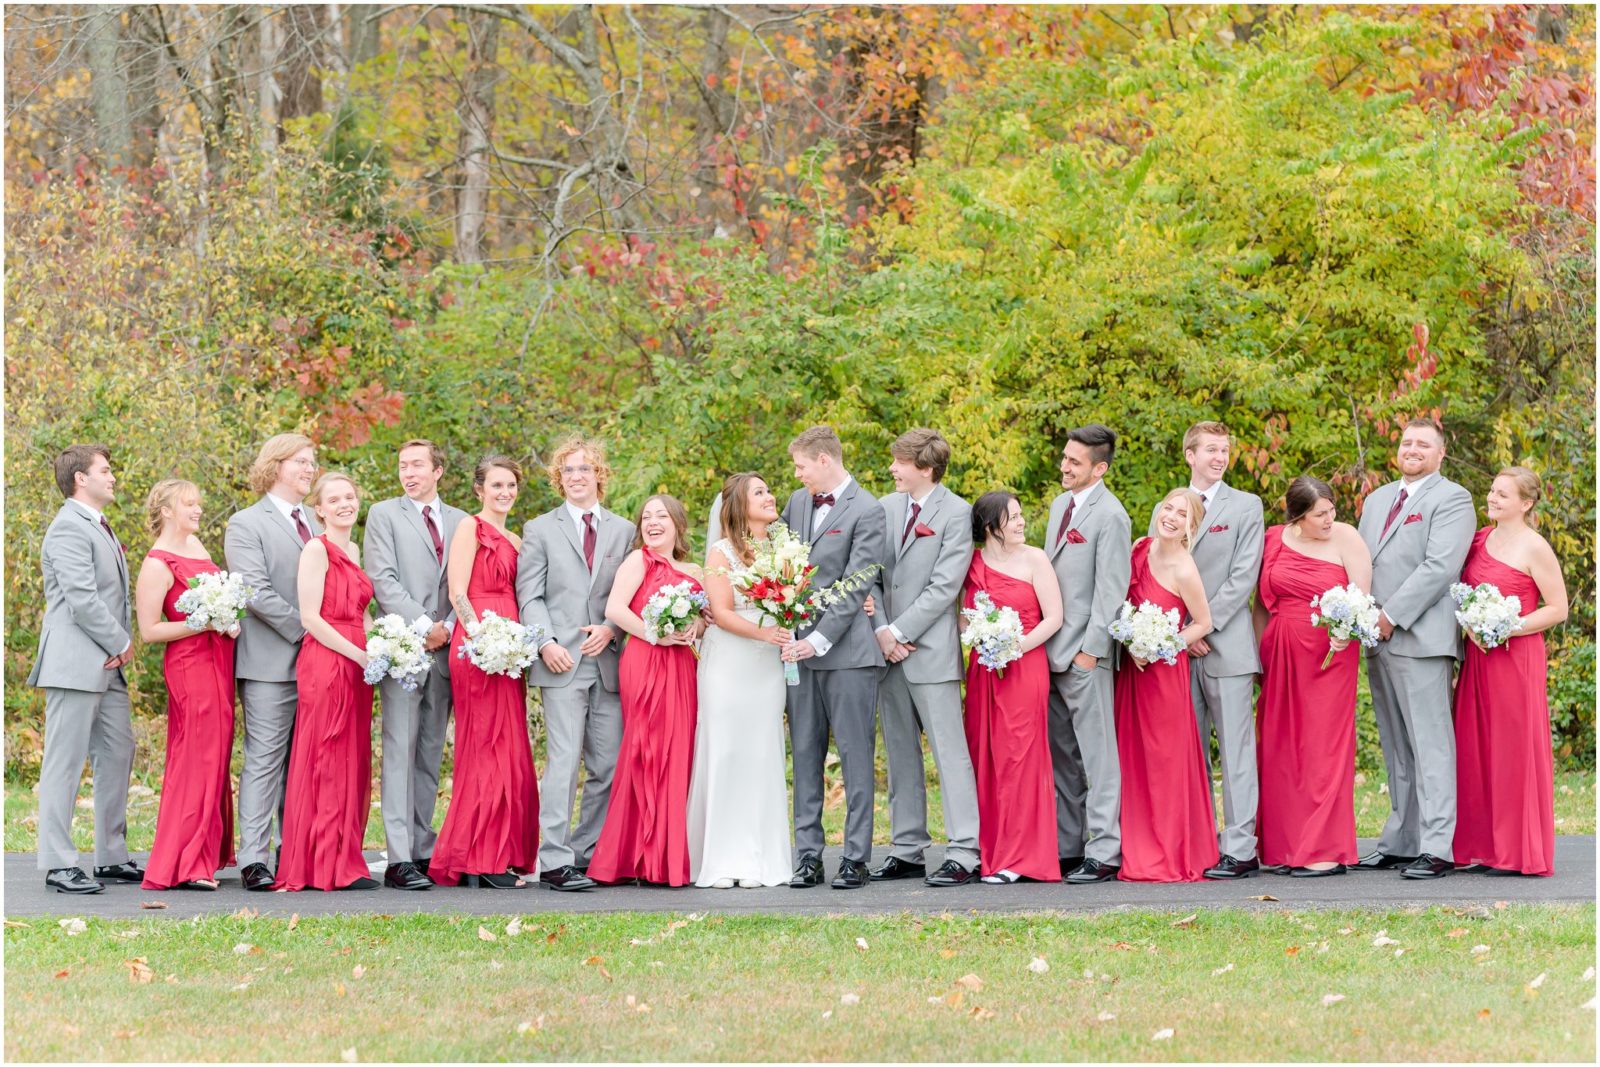 Bridal party laughing together Mt Gilead Church wedding